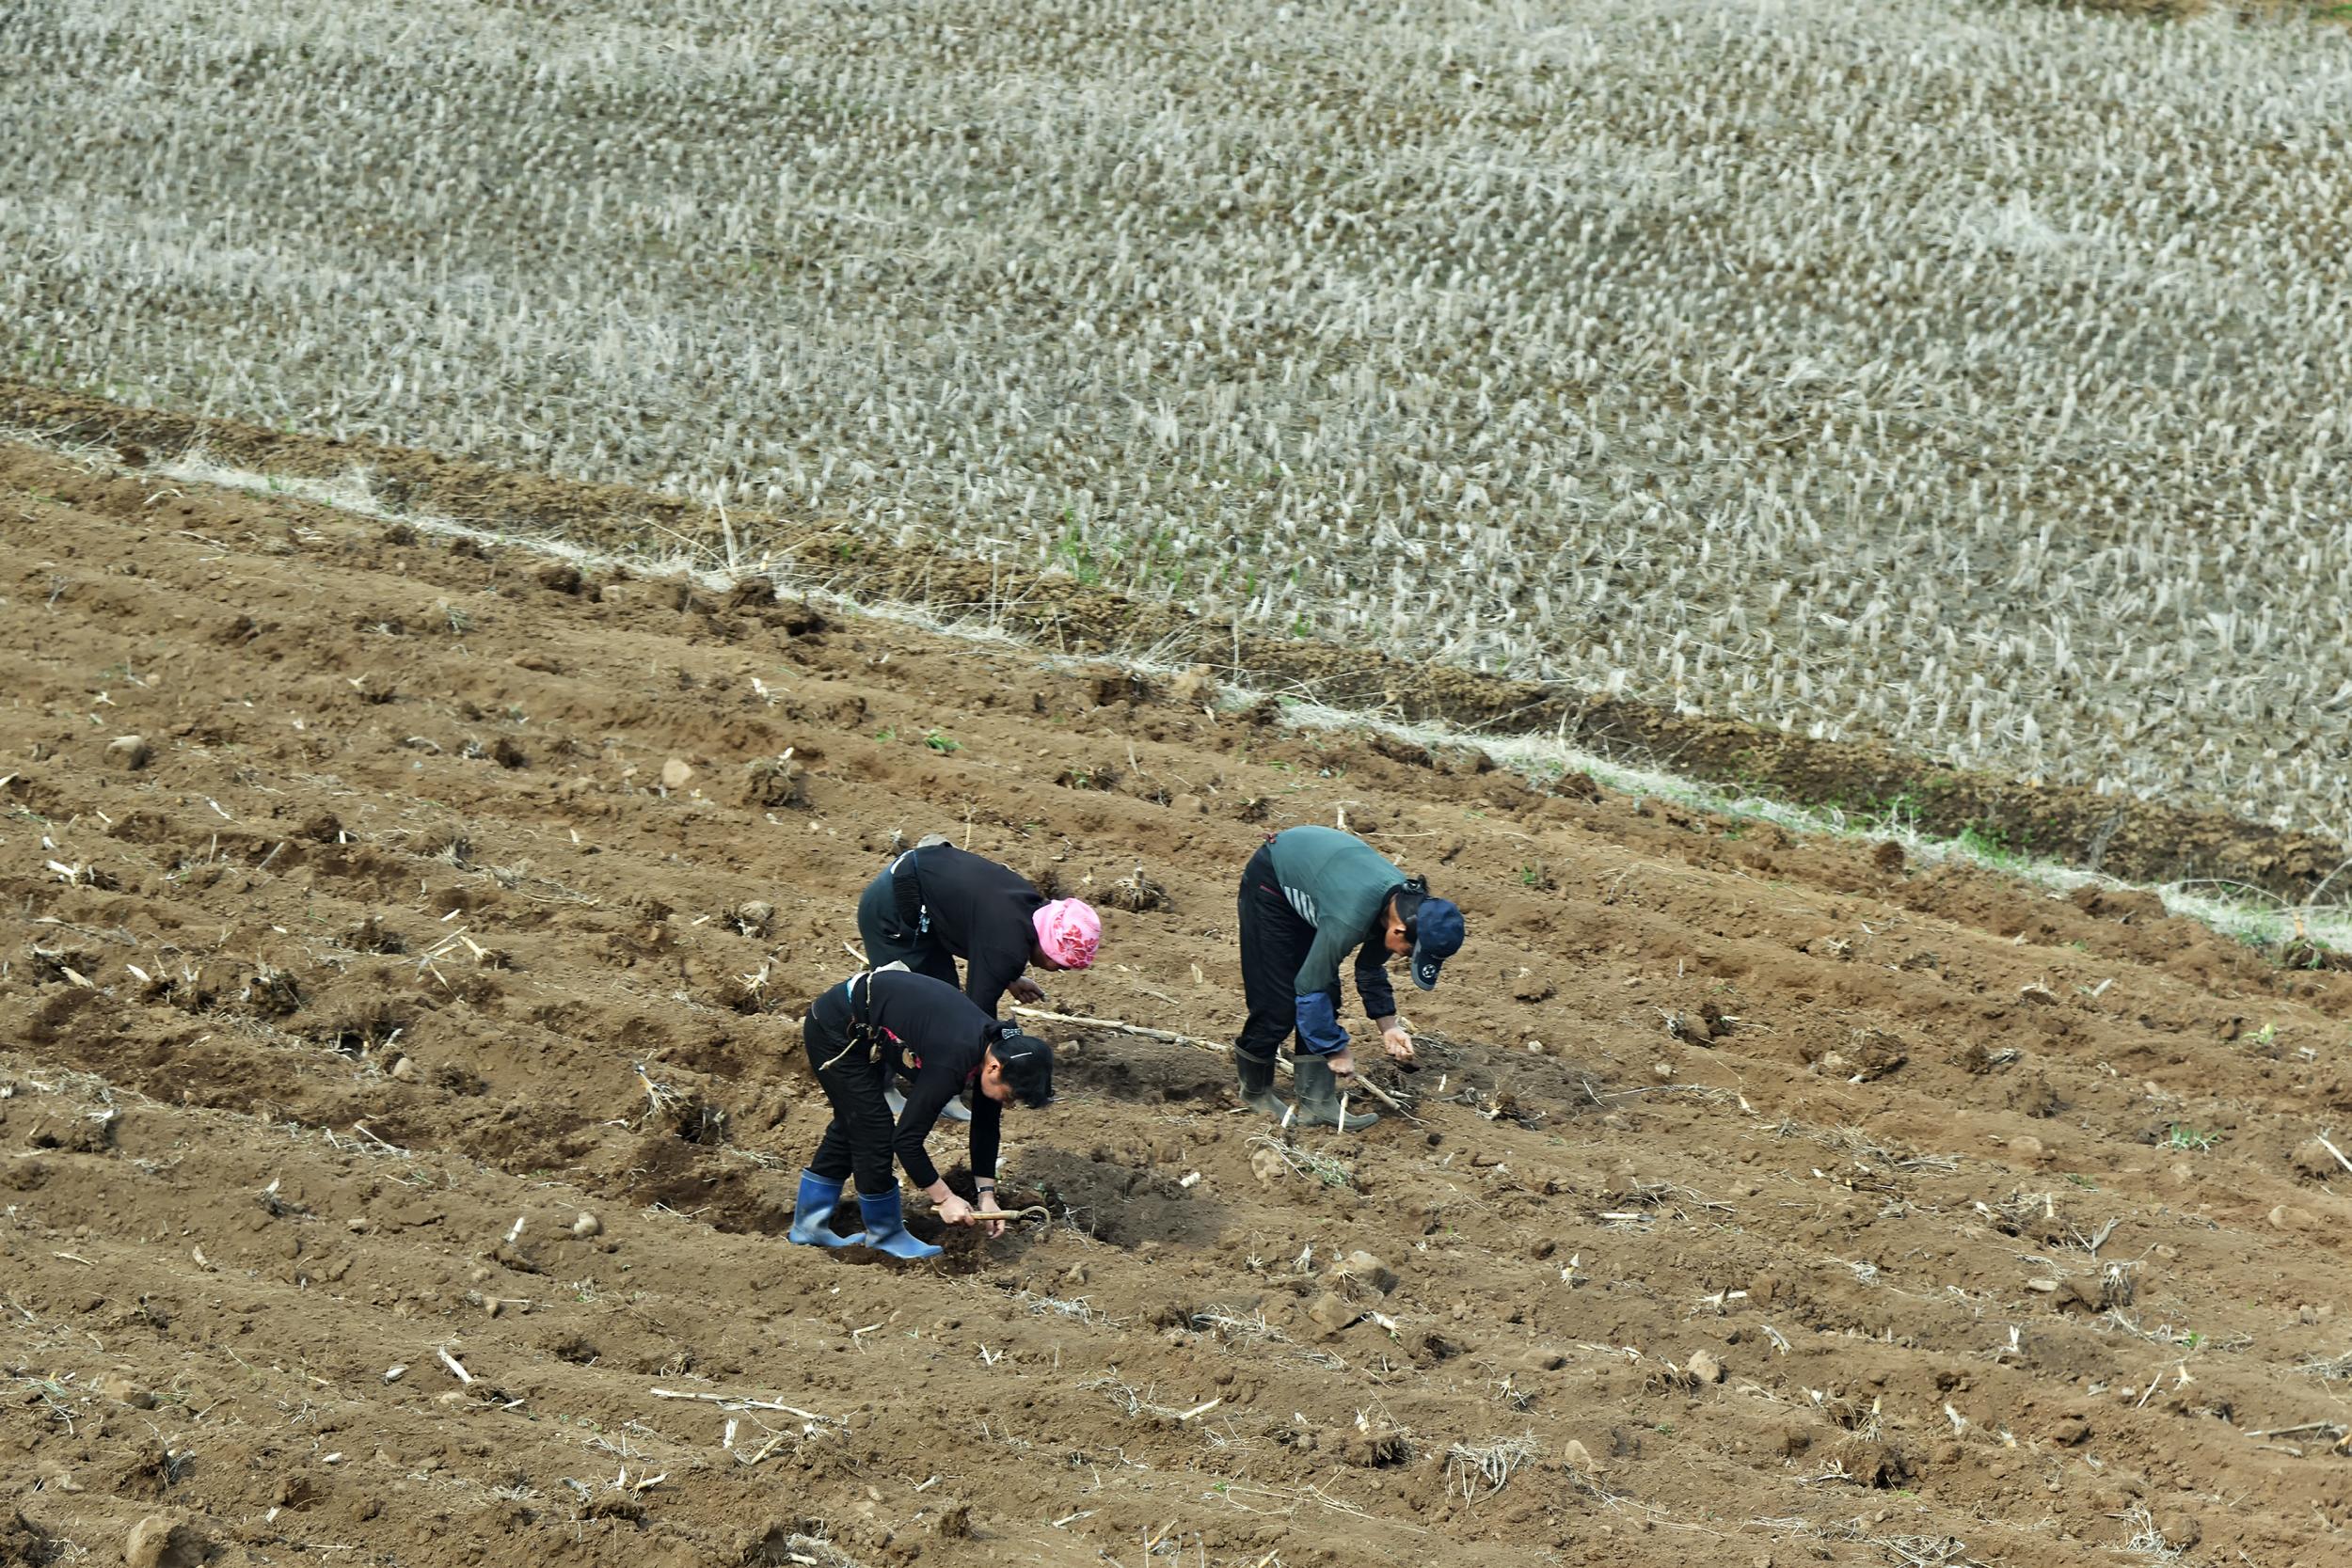 North Korean women pictured picking crops. More than 72 per cent of the 33,000 North Korean defectors in South Korea are women